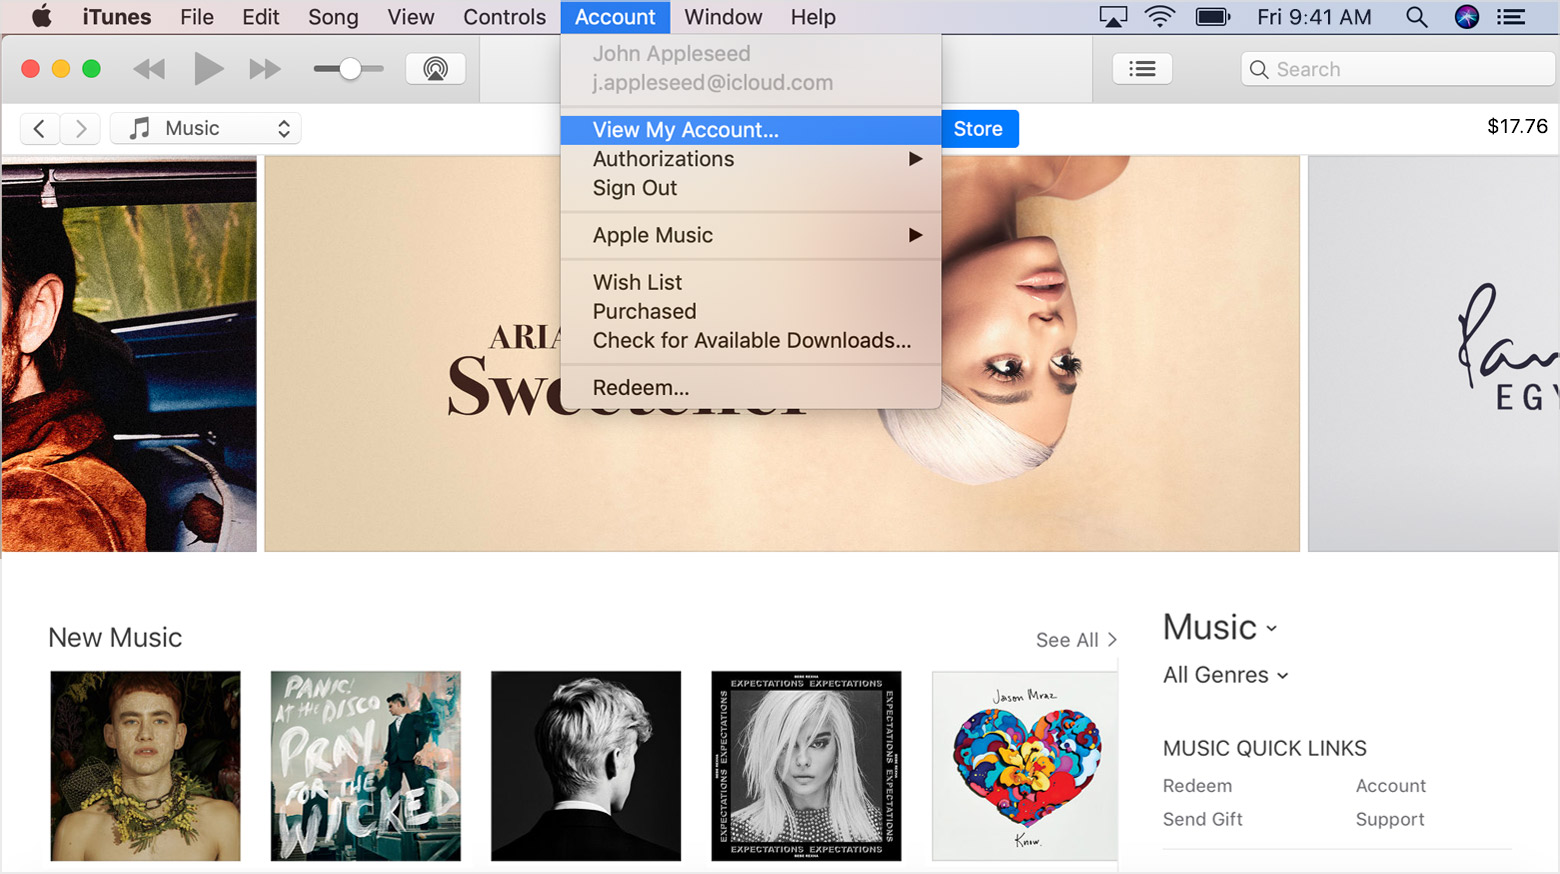 The iTunes Account menu open and View My Account selected. An iTunes Store window is visible in the background.